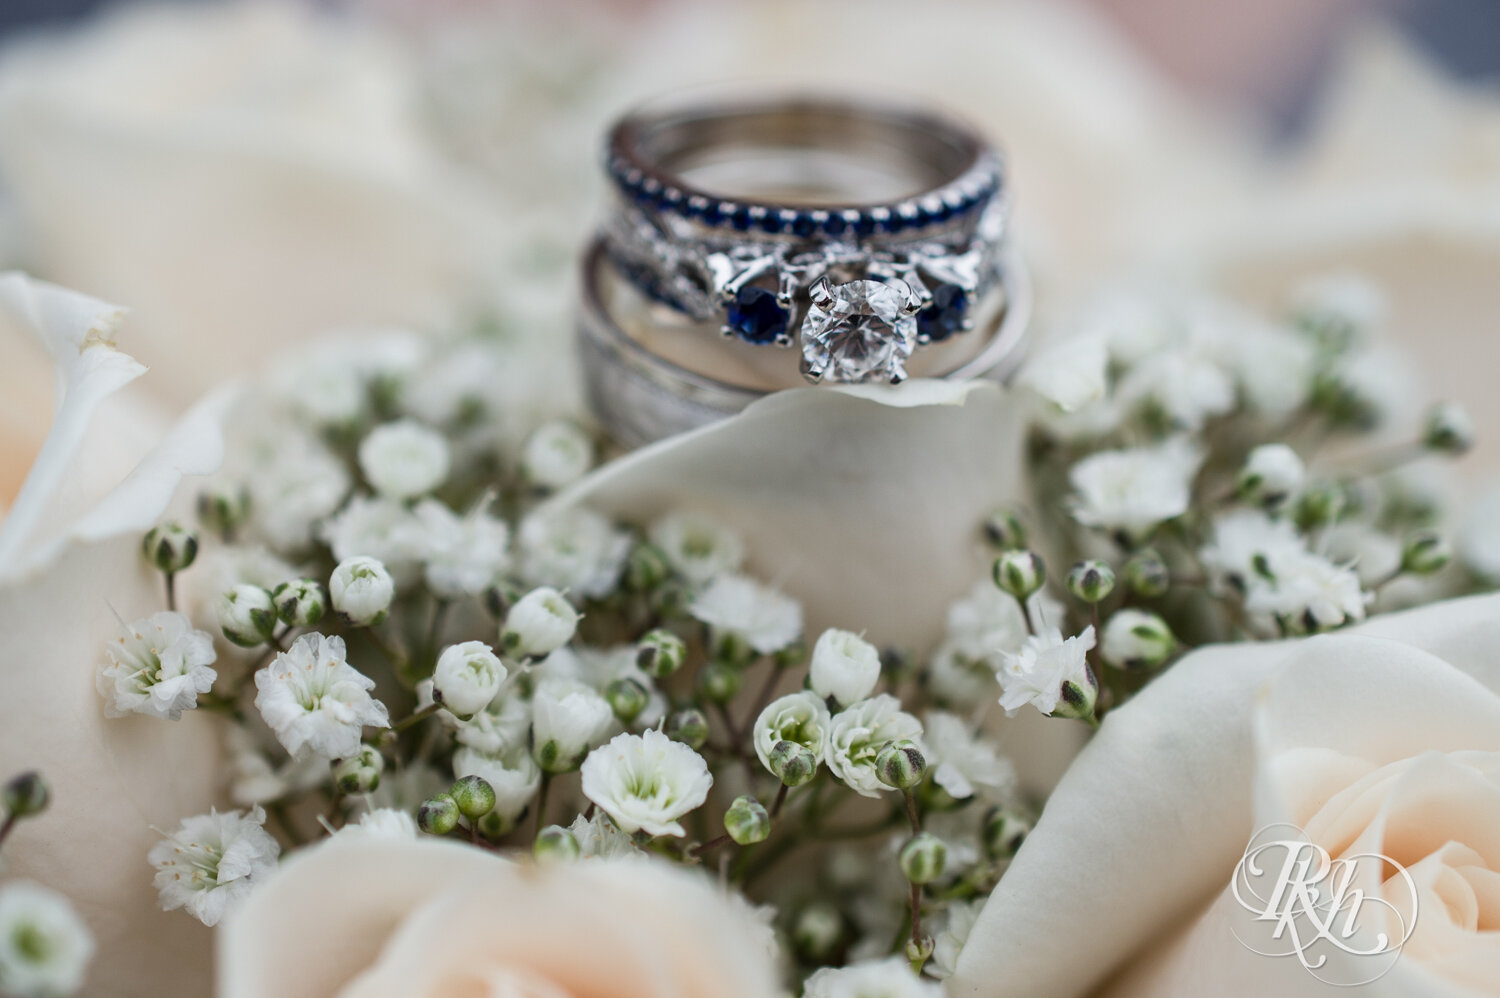 Wedding ring with sapphires